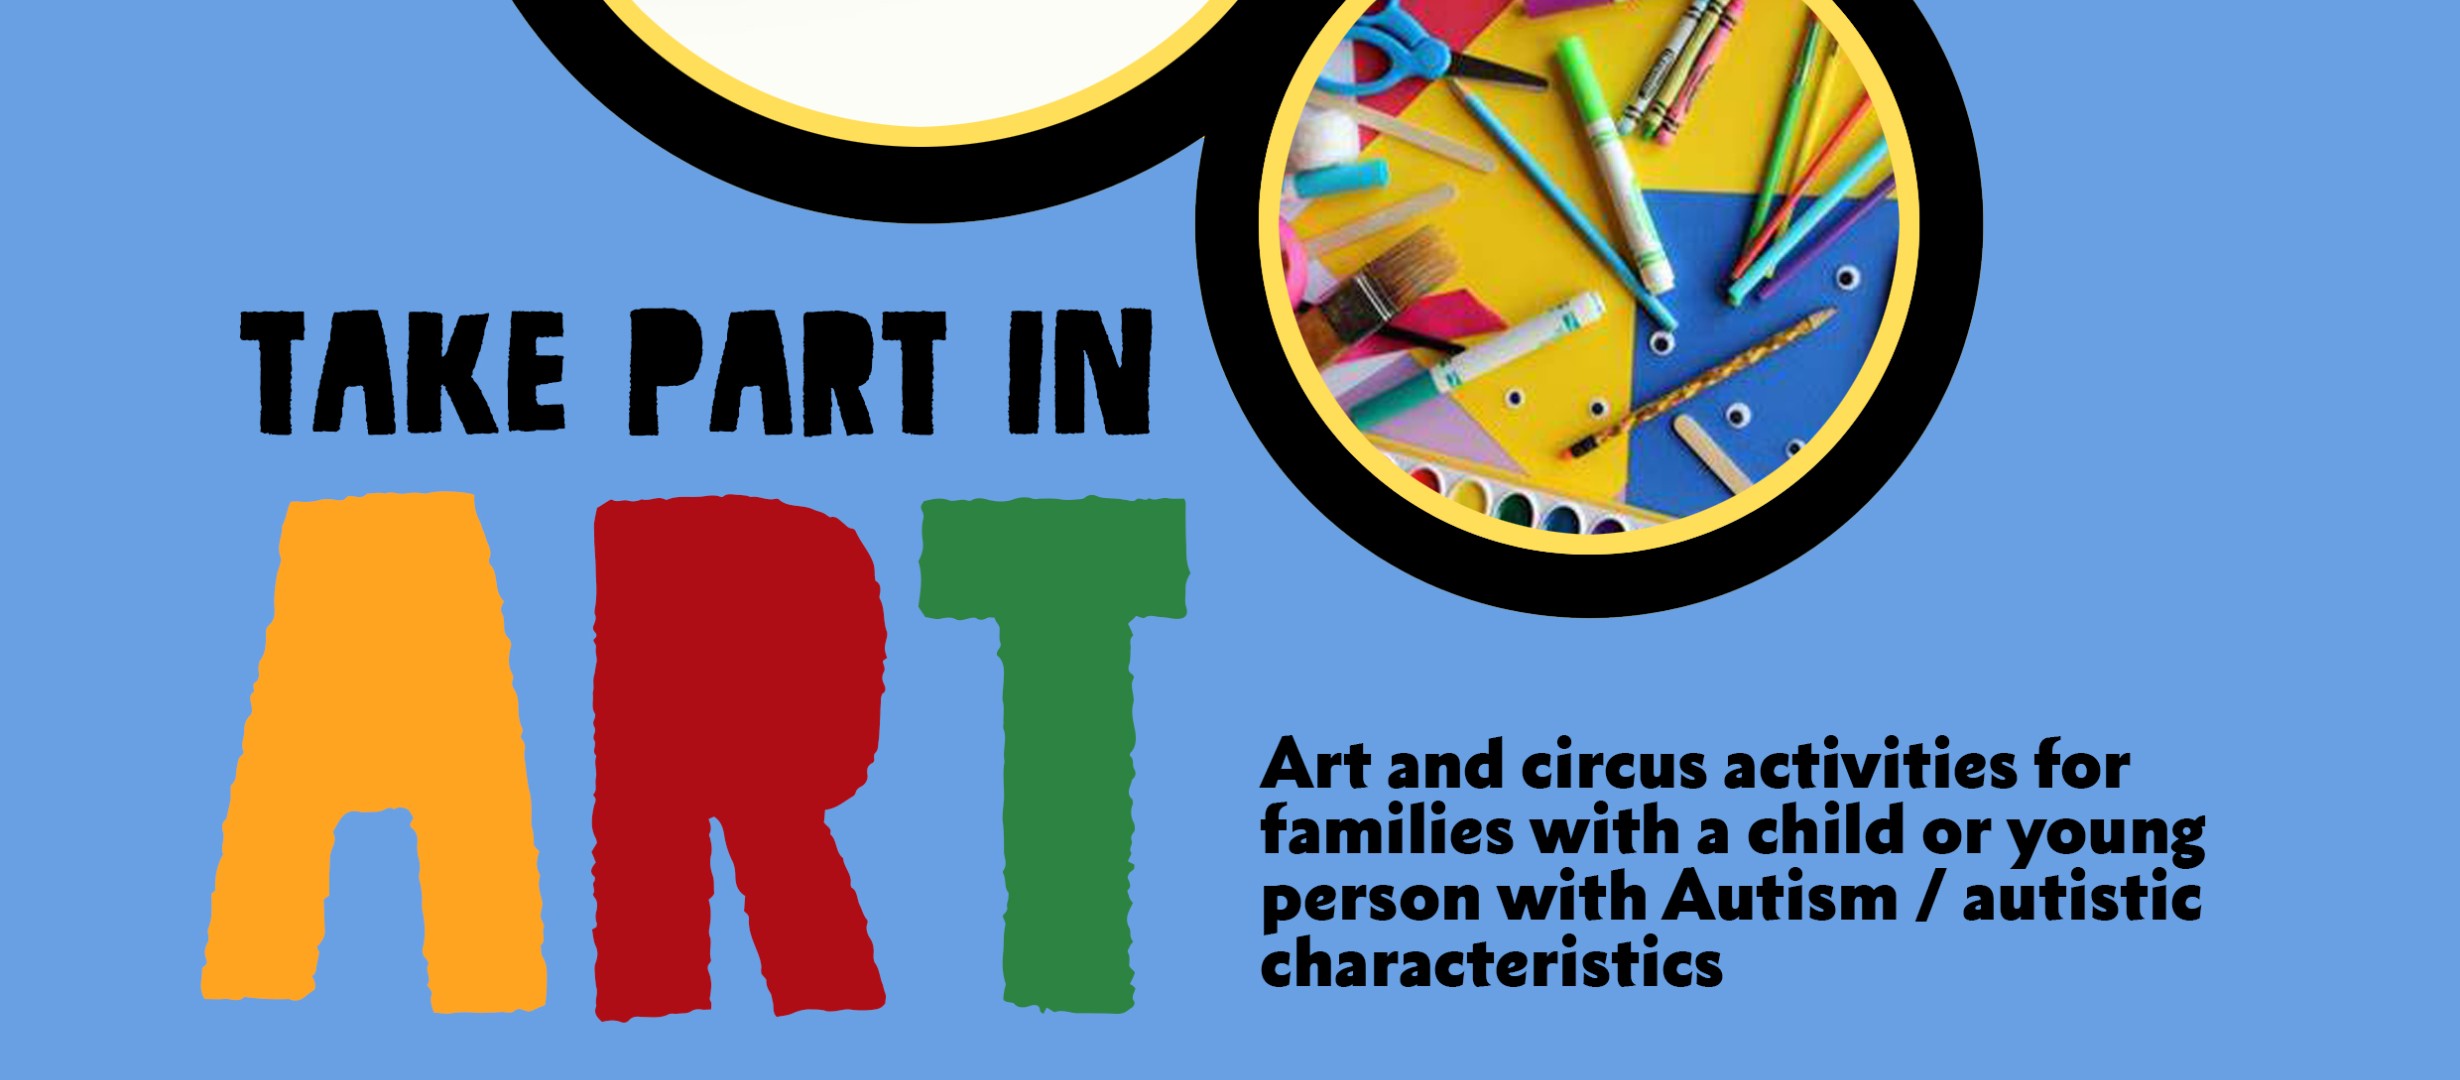 Art & Circus activities for families with a child or young person with Autism / autistic characteristics at Artspace Cinderford